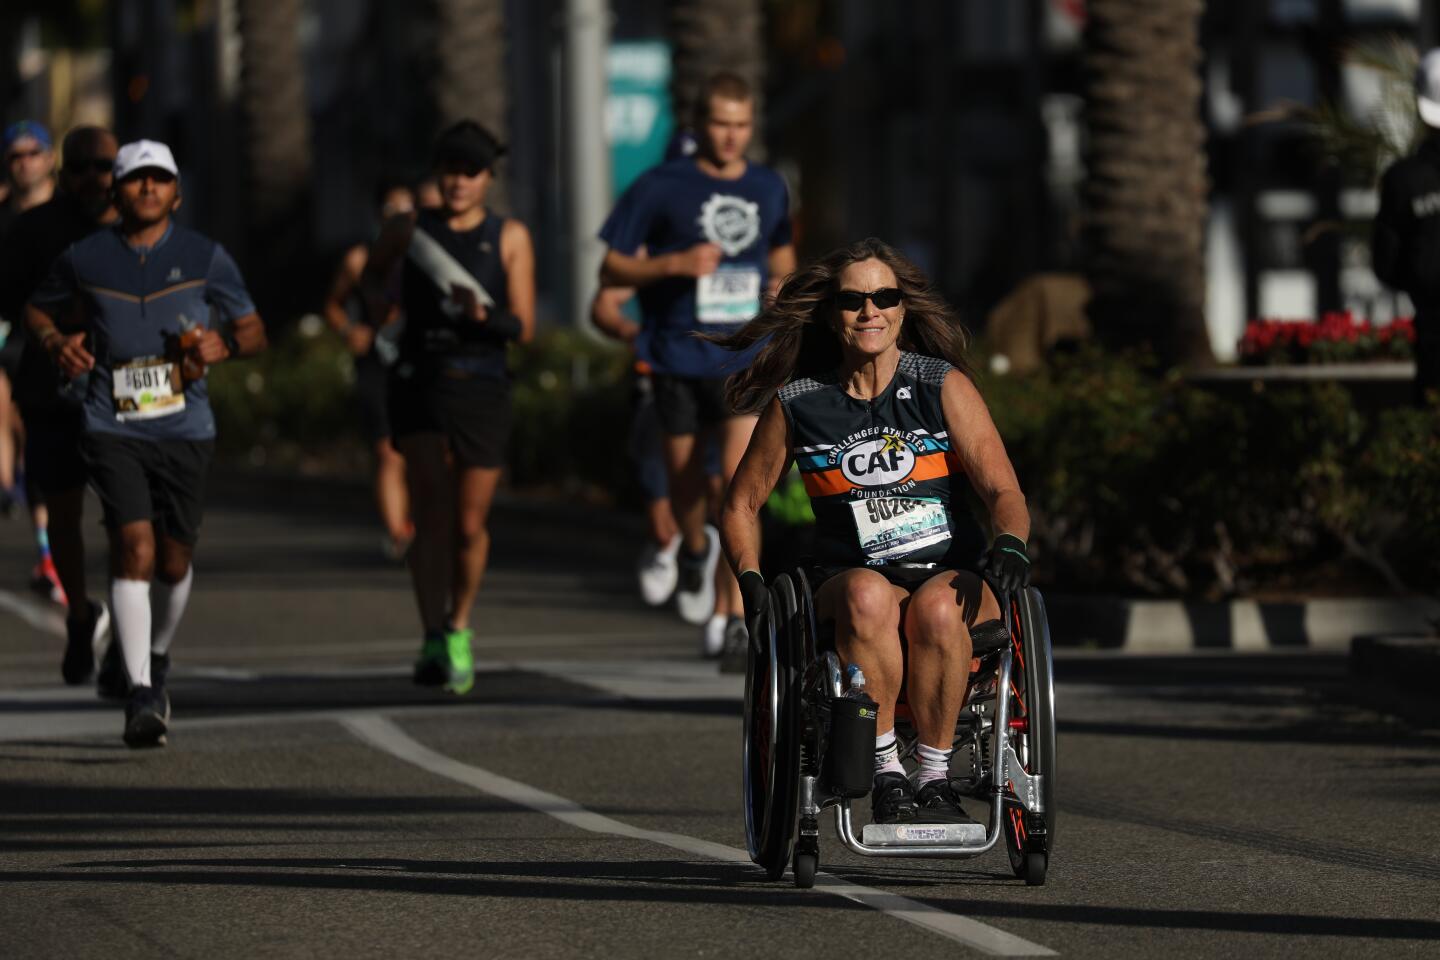 Participants during the 2020 L.A. Marathon on Sunday in Beverly Hills.